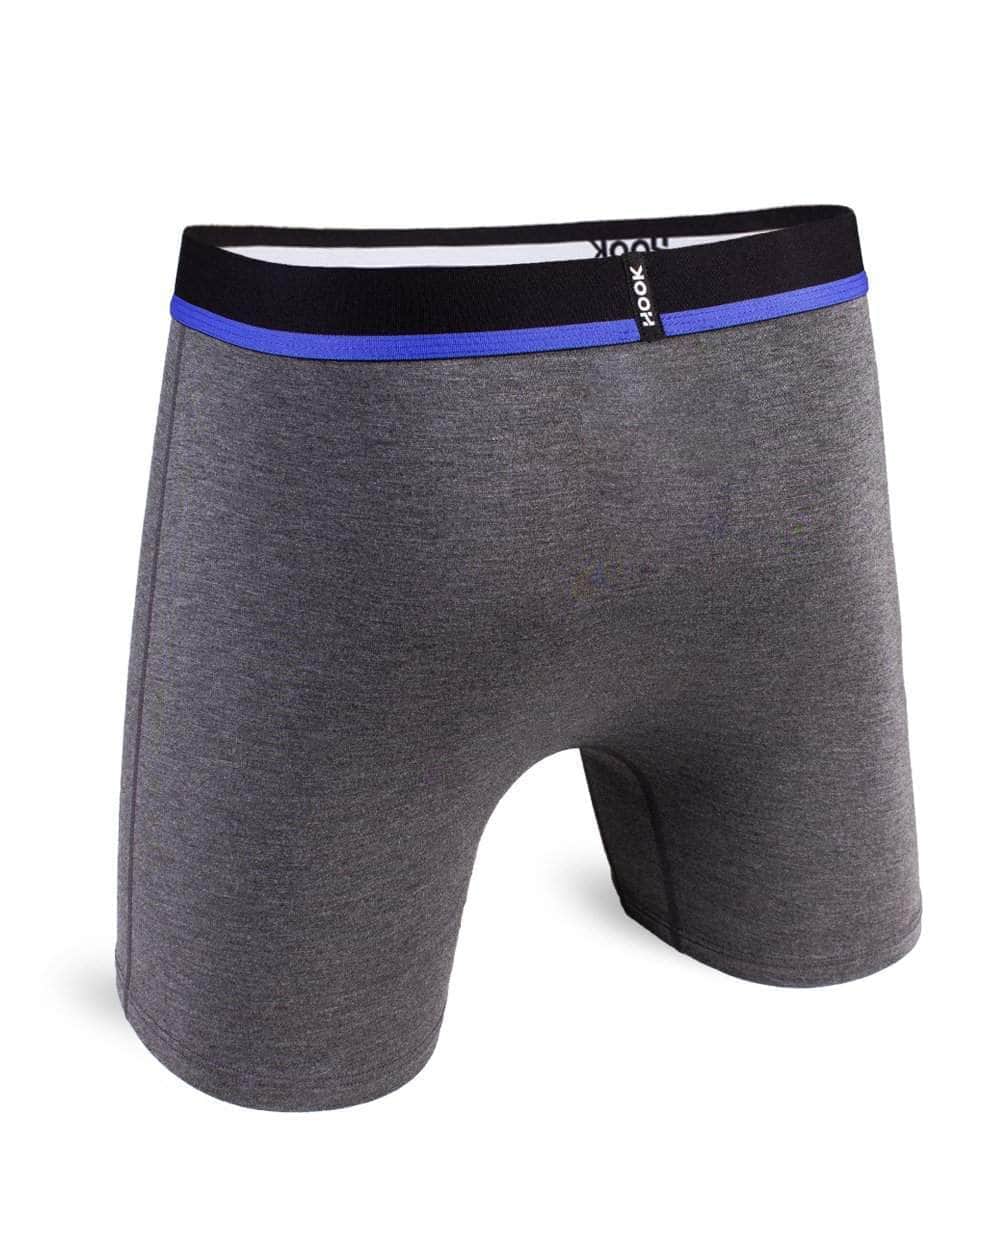 Boxer Hook Feel Solid Charcoal & Blue